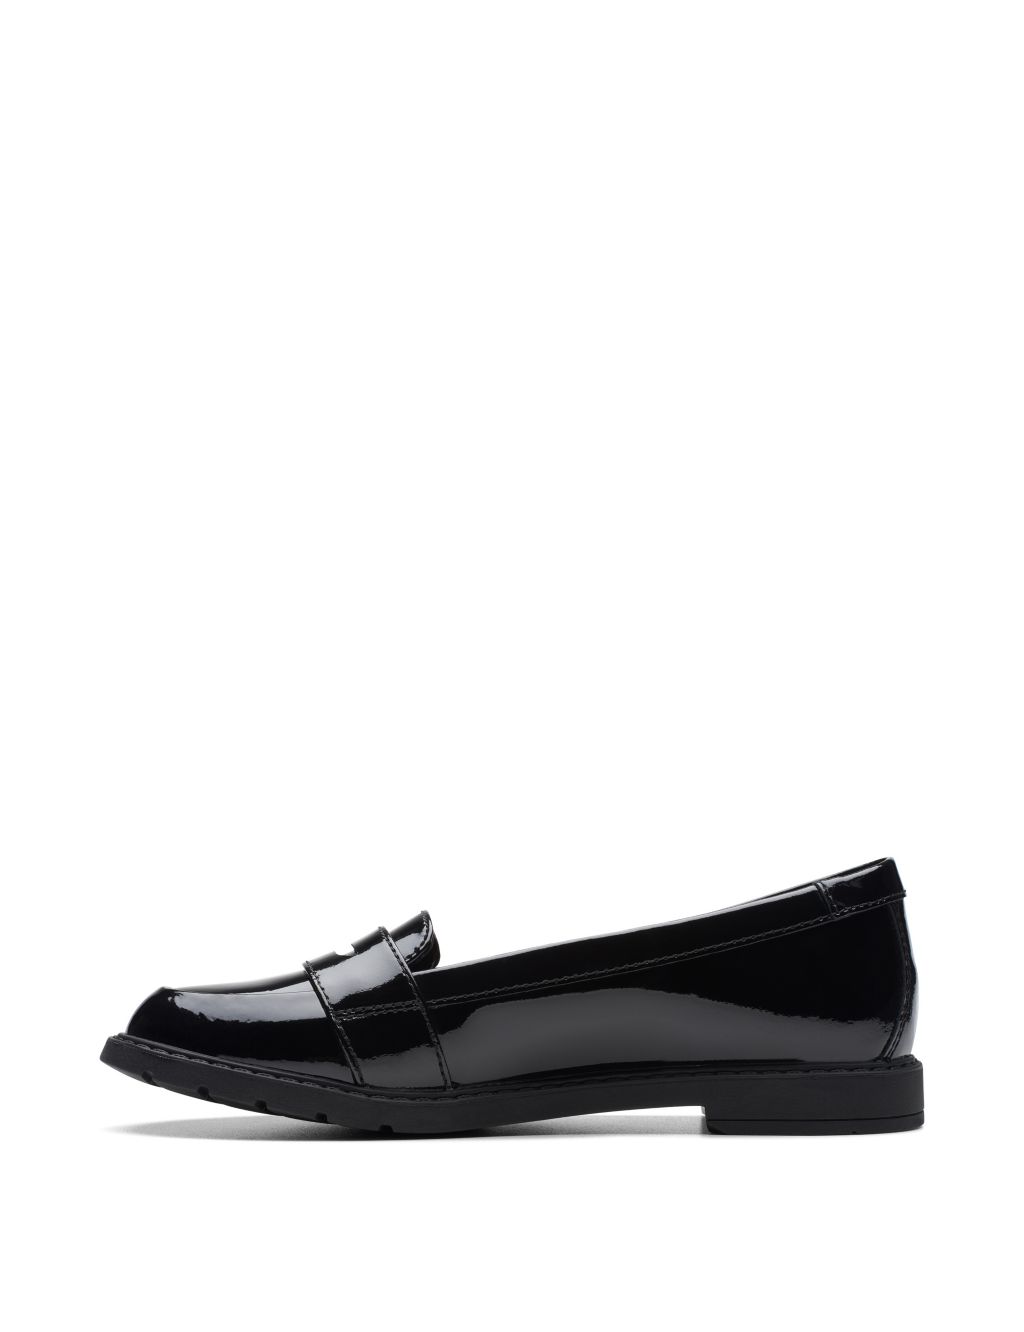 Kids' Patent Leather Slip-On Loafers (13 Small - 2½ Large) image 6